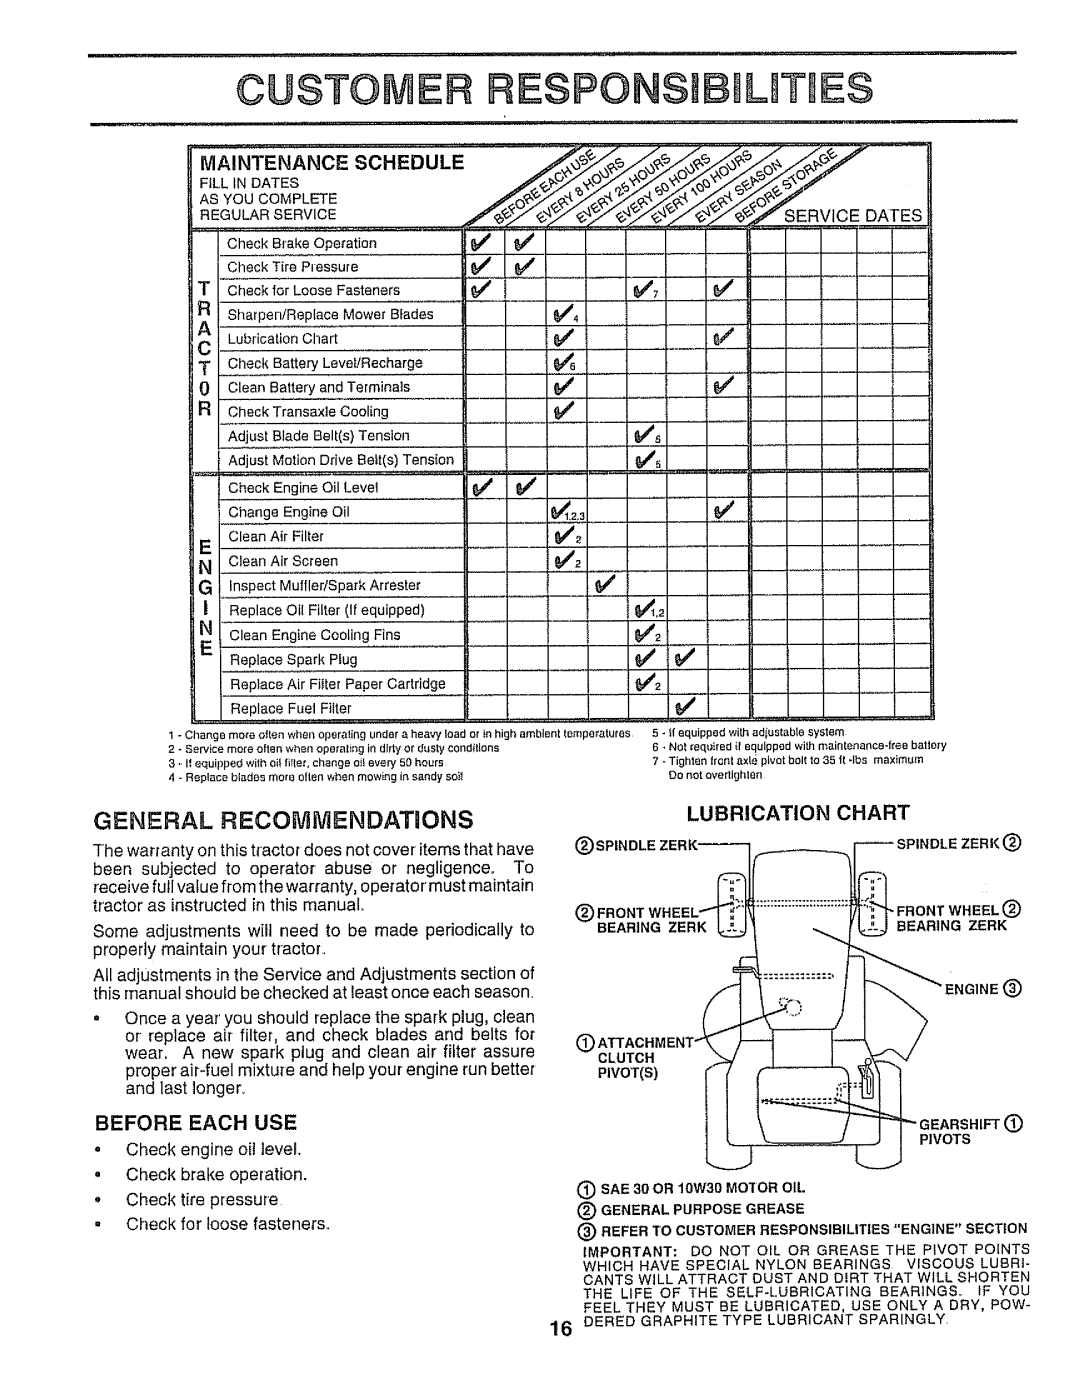 Sears 917.25958 manual Customer Responsibilities, General Recommendatuons, Lubrication, Chart 